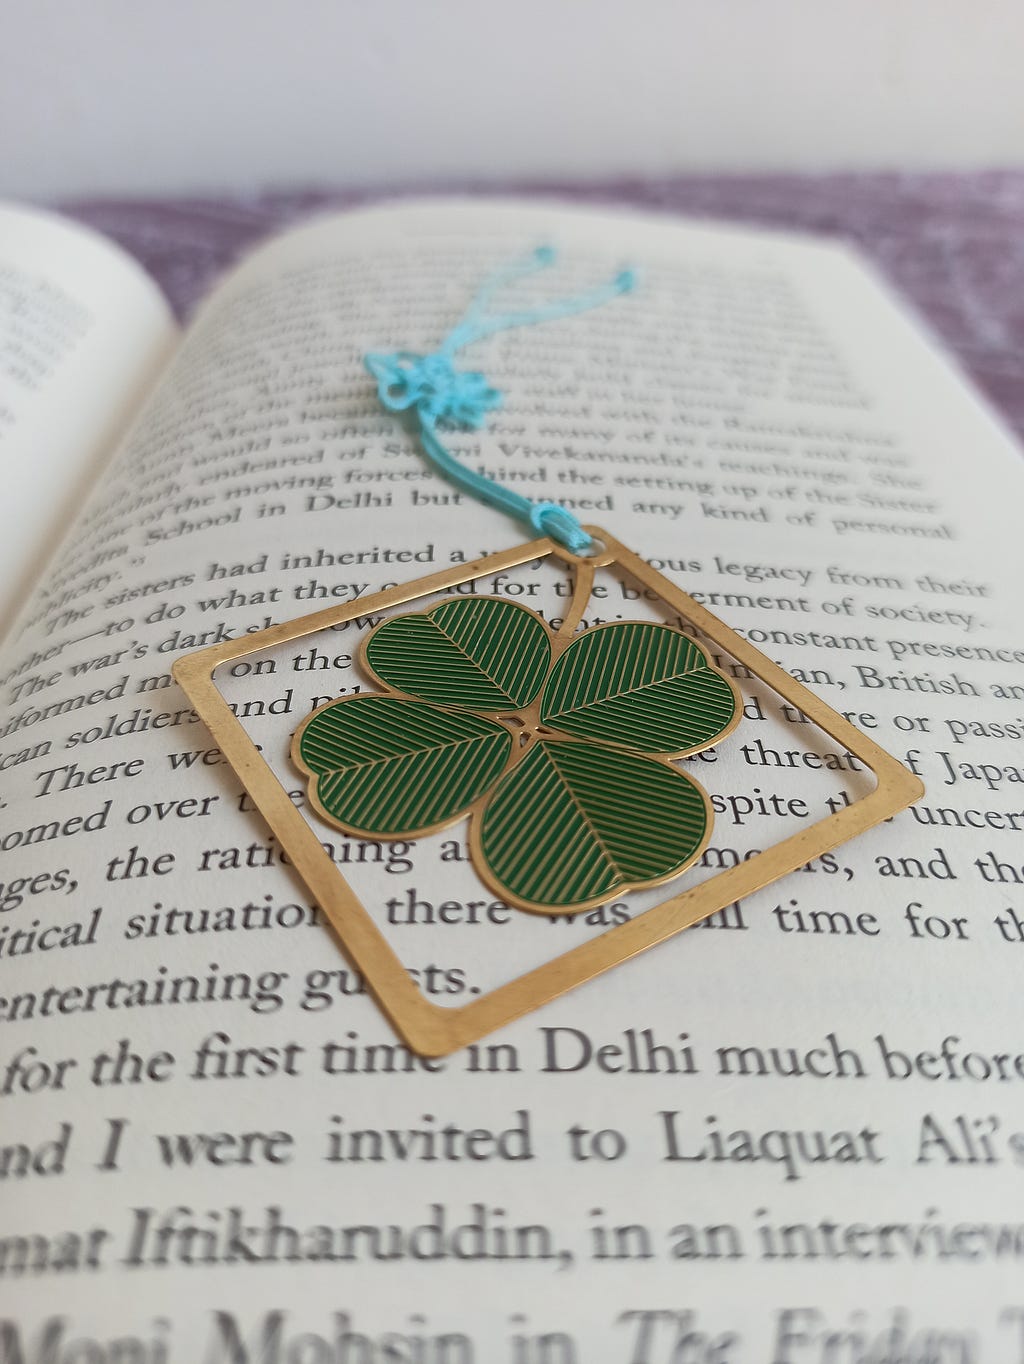 The image shows an open book. The words are blurred. On top of the page is a bookmark with a four leave clover pattern on it.